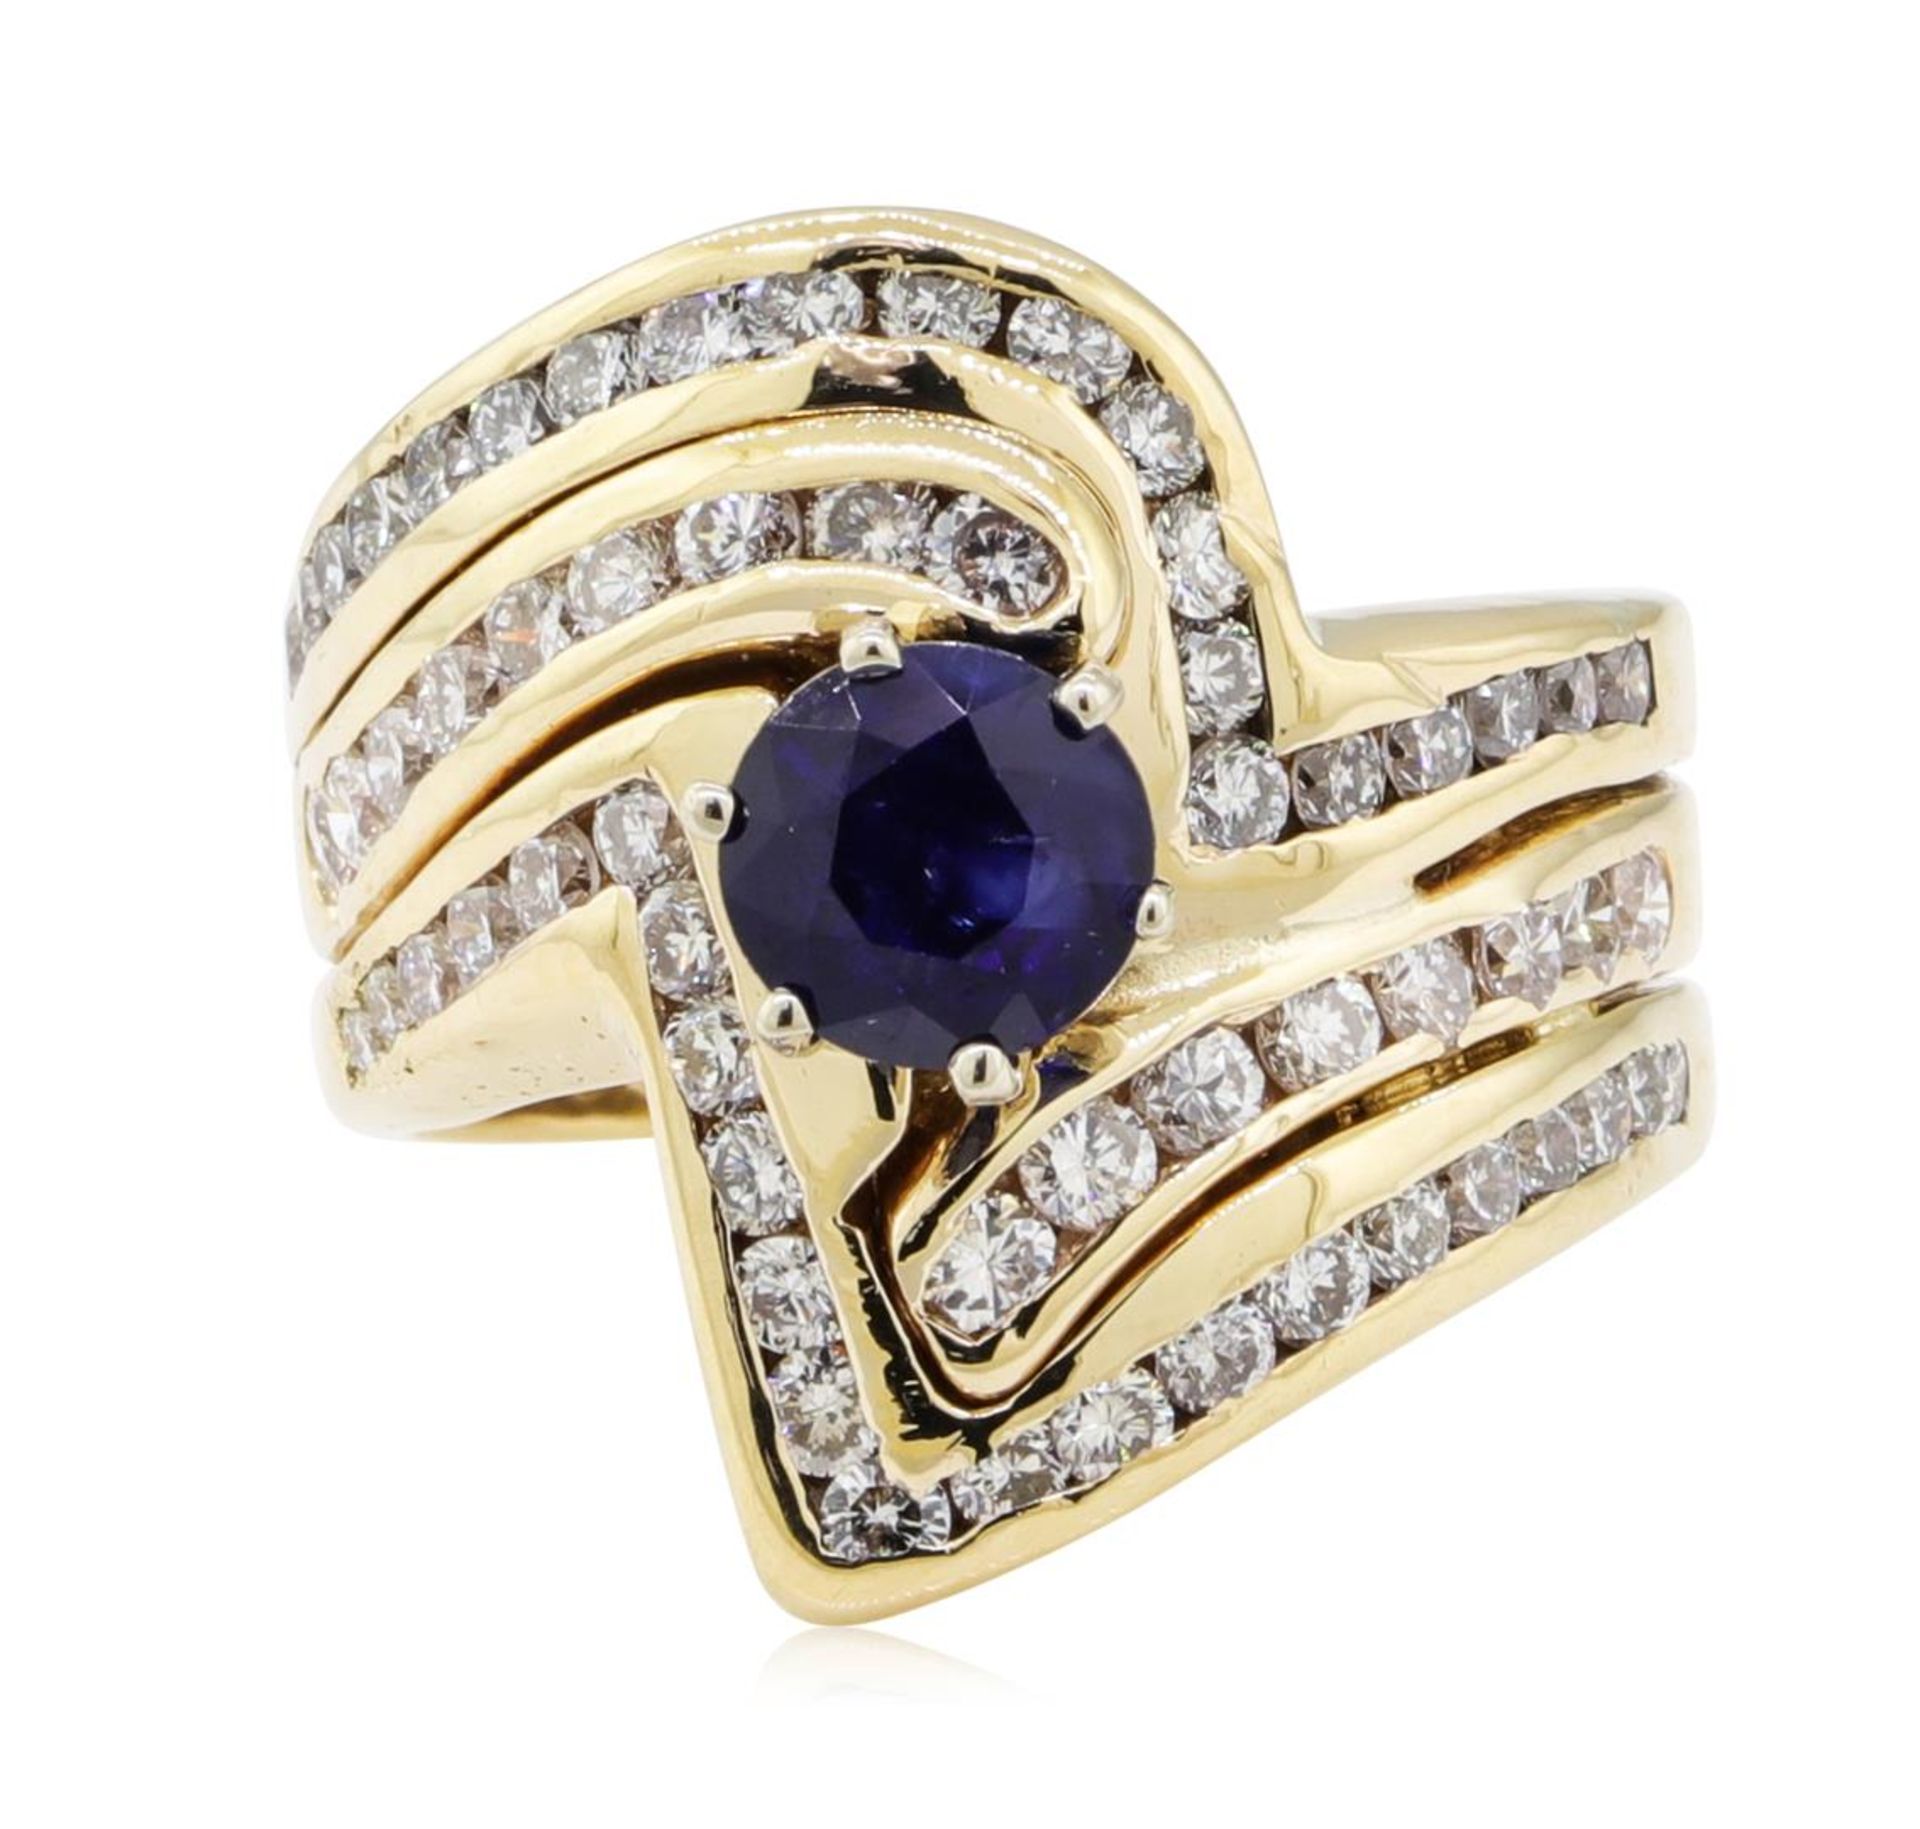 1.97 ctw Sapphire and Diamond Ring - 14KT Yellow Gold - Image 2 of 5